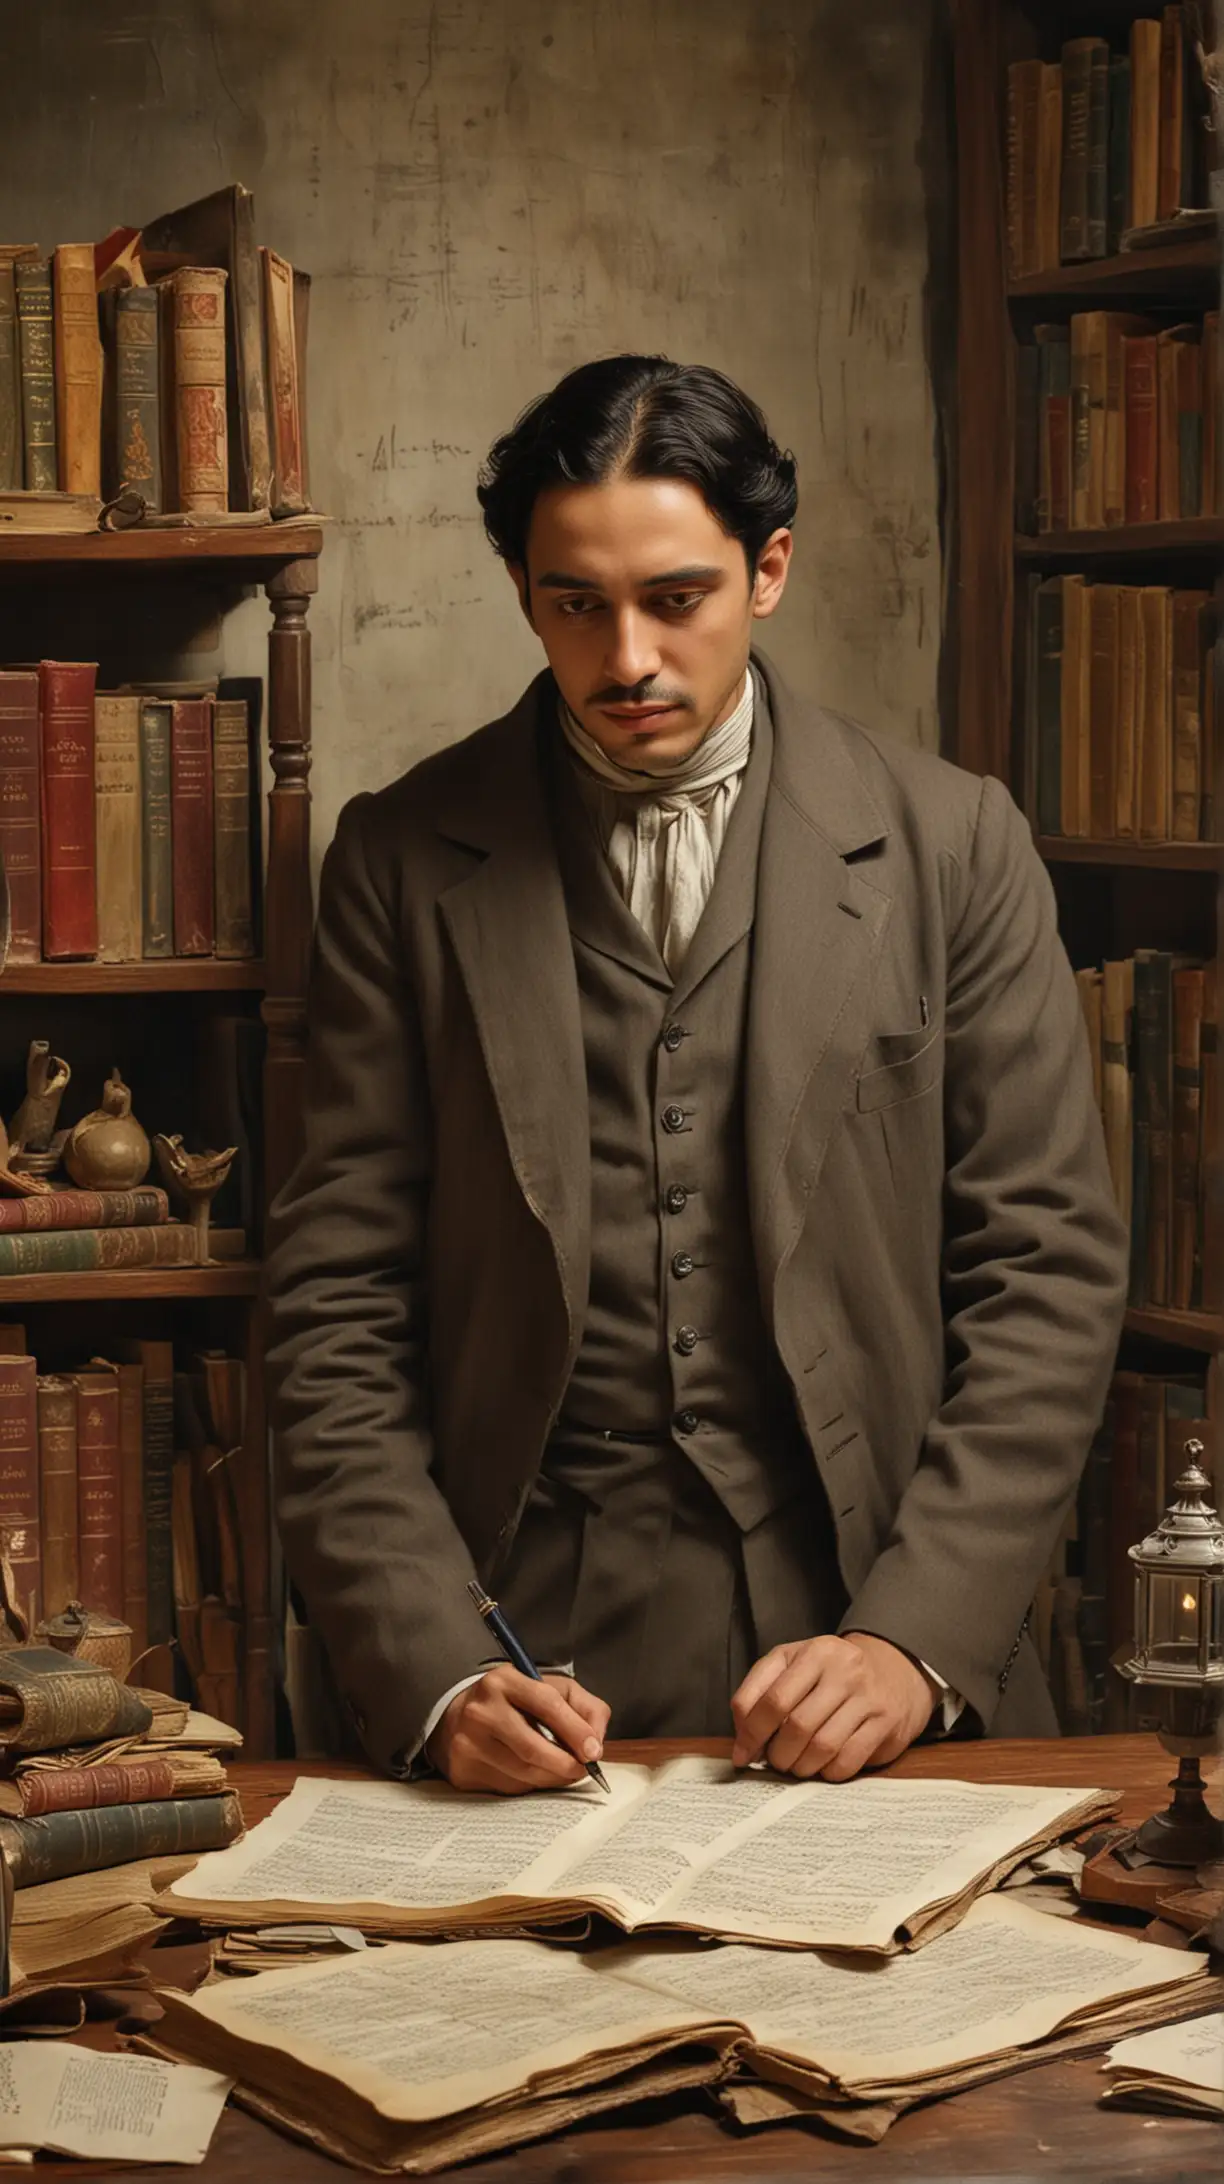 Depict a 1930s setting where a scholar, Santiago Mendes Espadas, is writing the biography of Veneslao Moguel, surrounded by books and notes. The scene should exude a sense of historical importance.